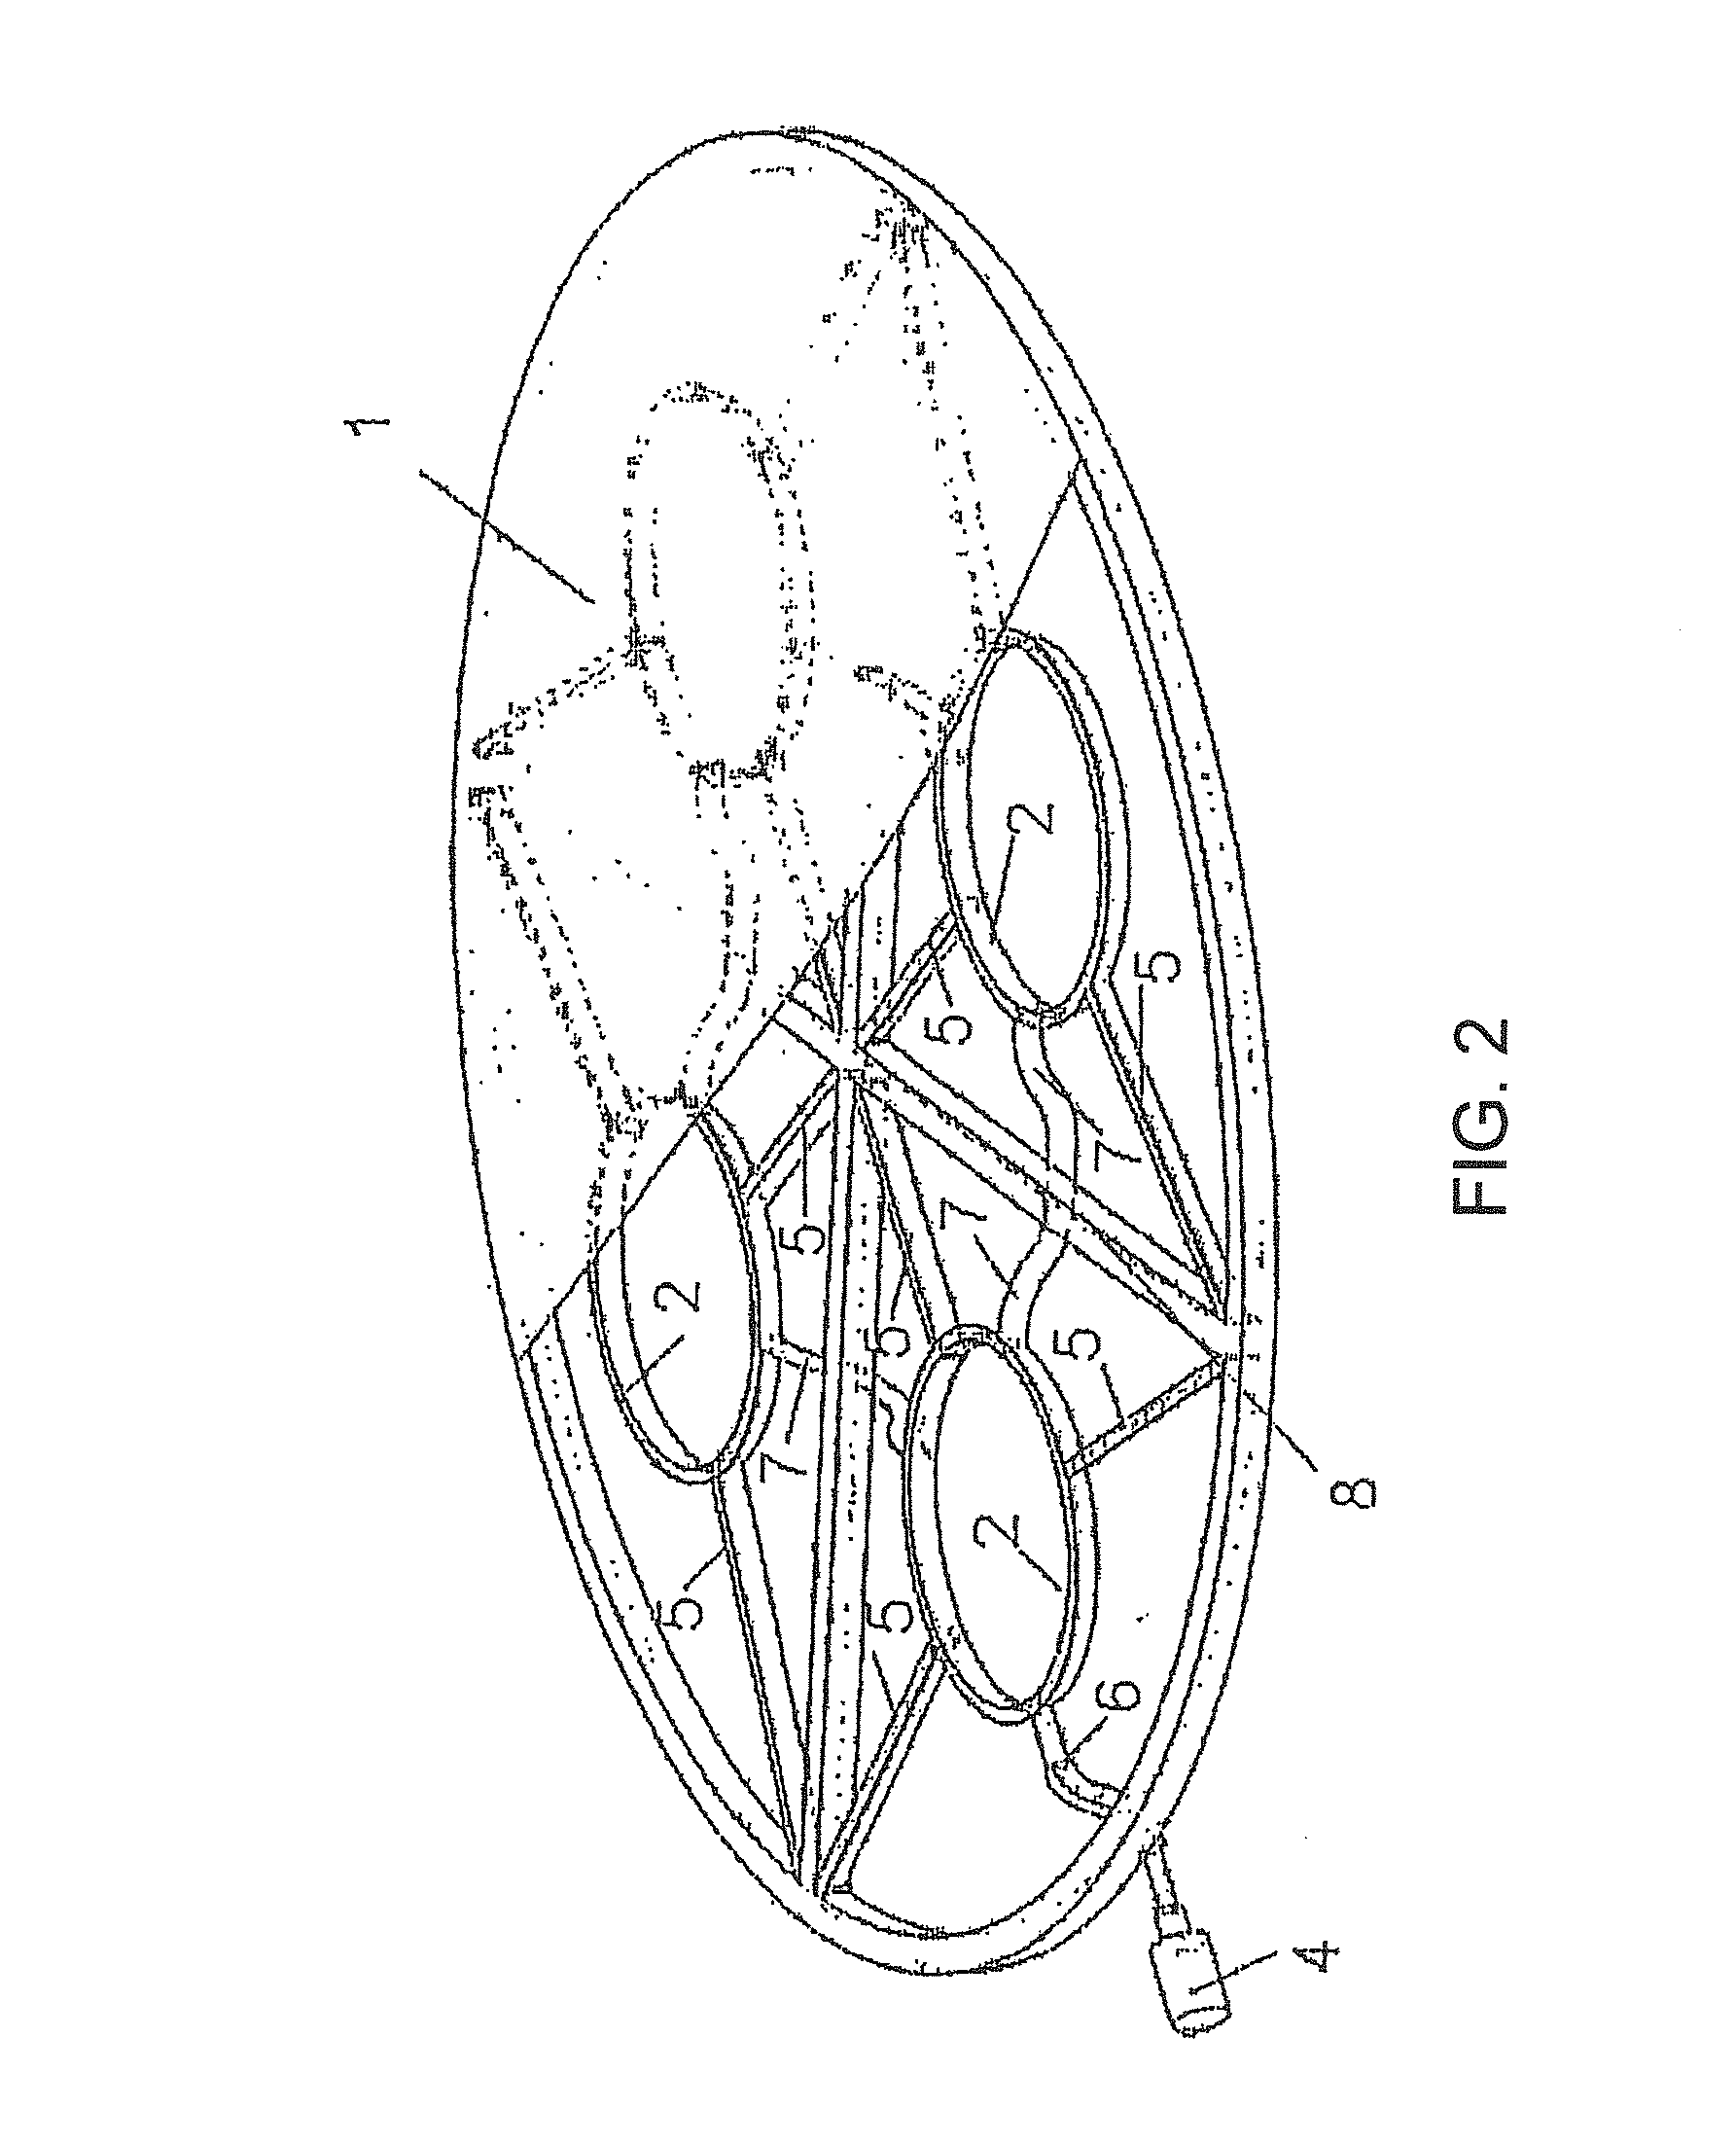 Method and system for ultrasound excitation of structures with various arbitrary geometry